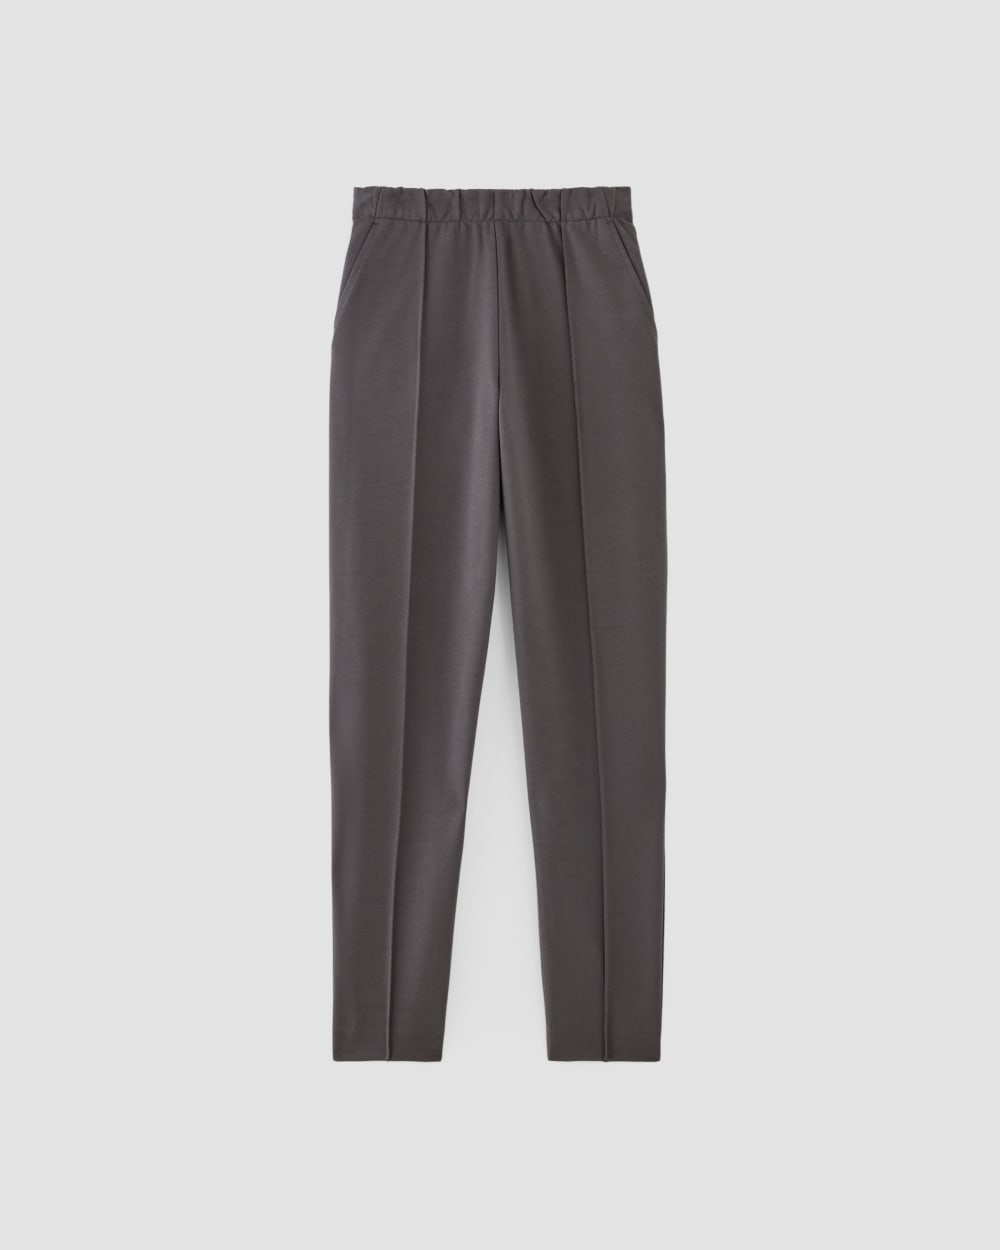 Everlane Dream Pant is the perfect trouser-sweatpant hybrid